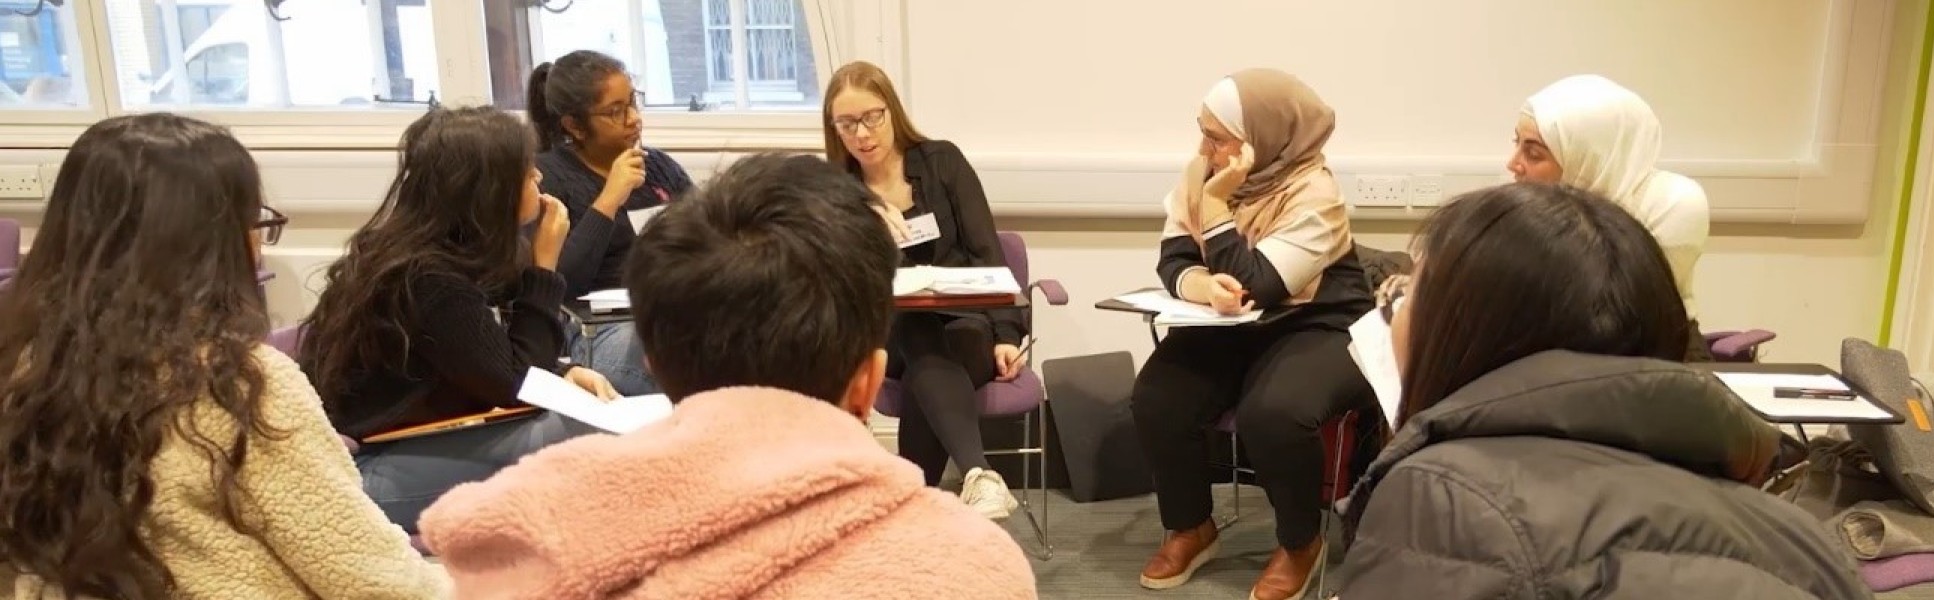 A group of students taking part in a discussion